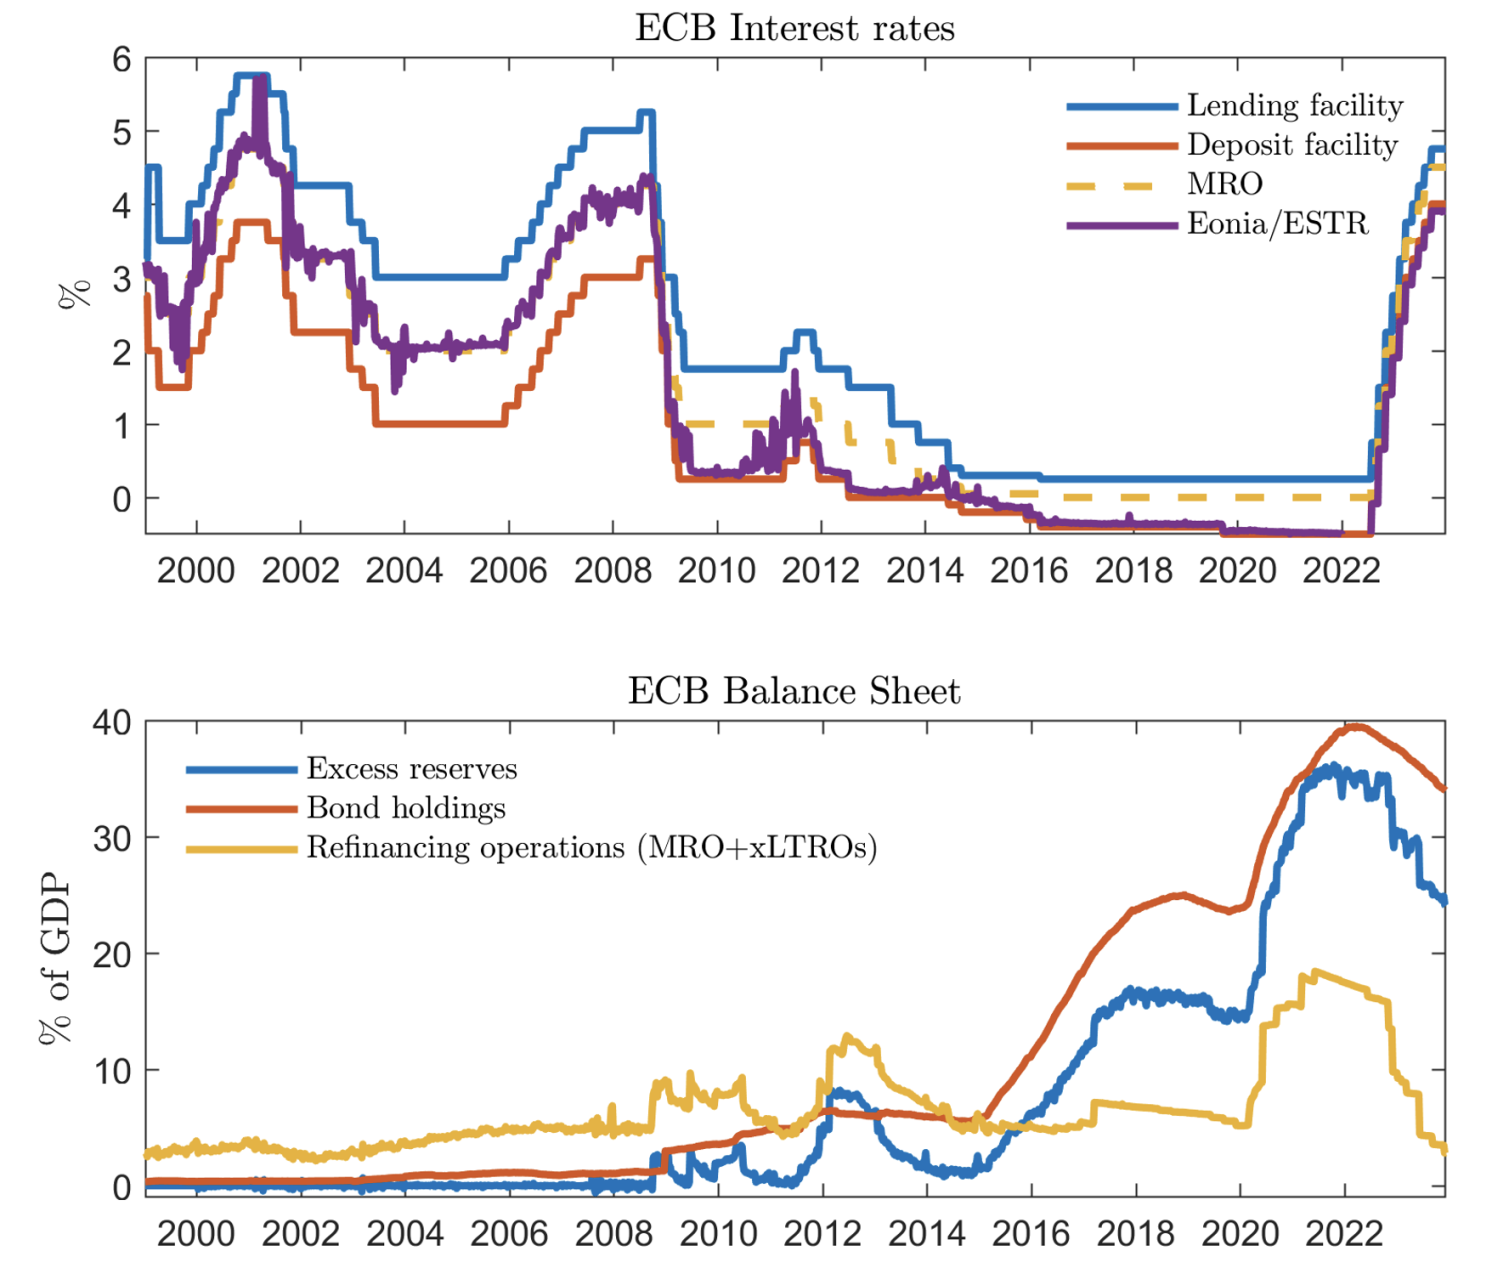 Figure 1 ECB interest rates and balance sheet composition, 1999-2023